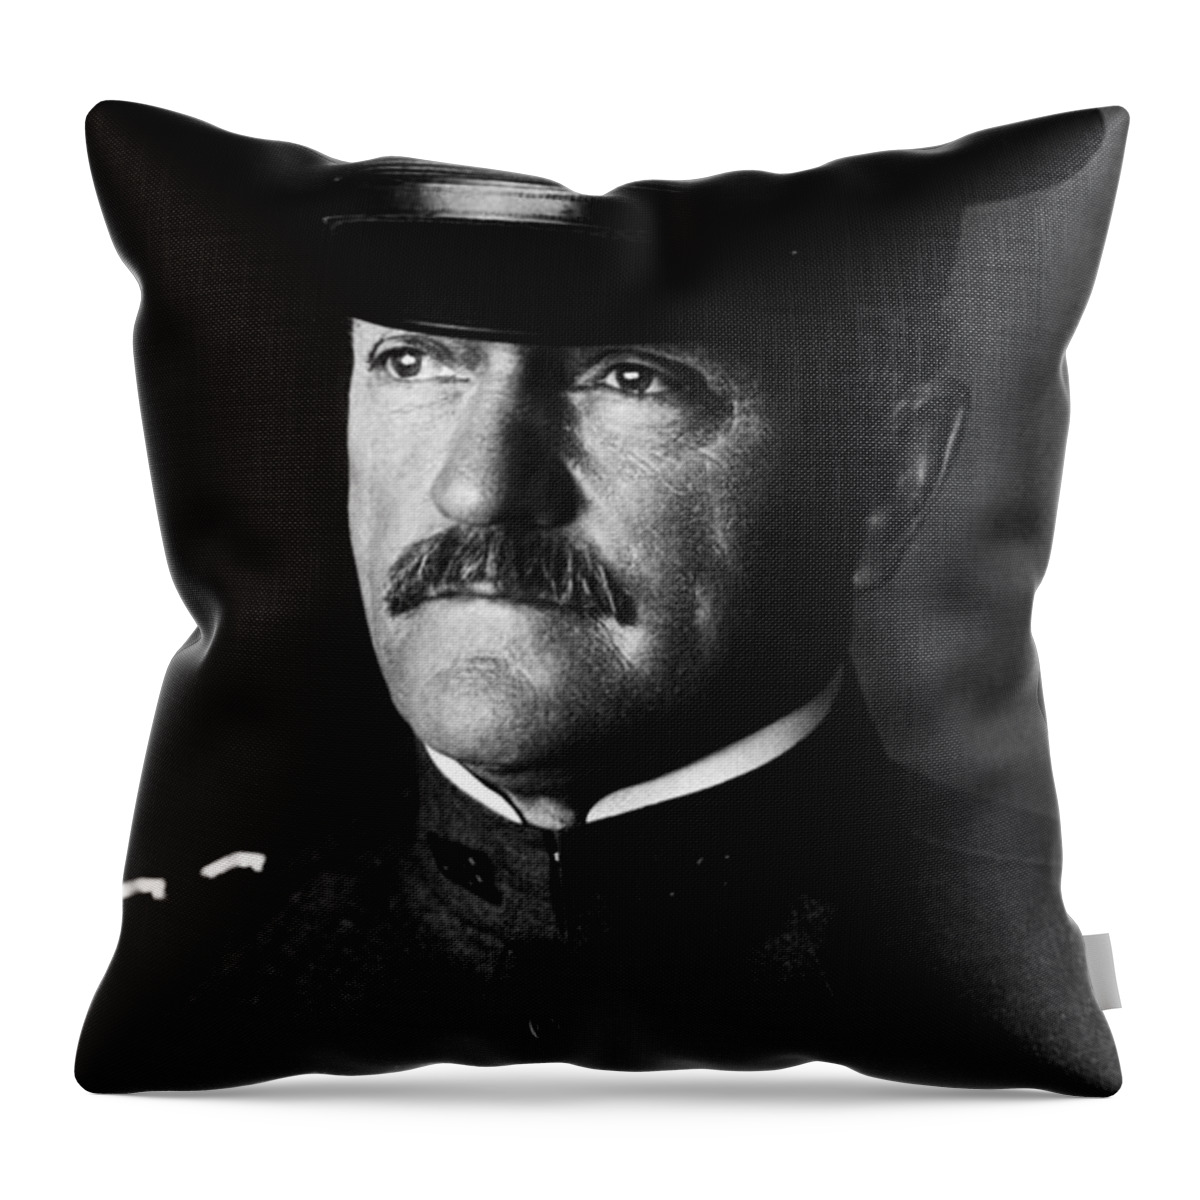 General Pershing Throw Pillow featuring the photograph General John Pershing Portrait by War Is Hell Store